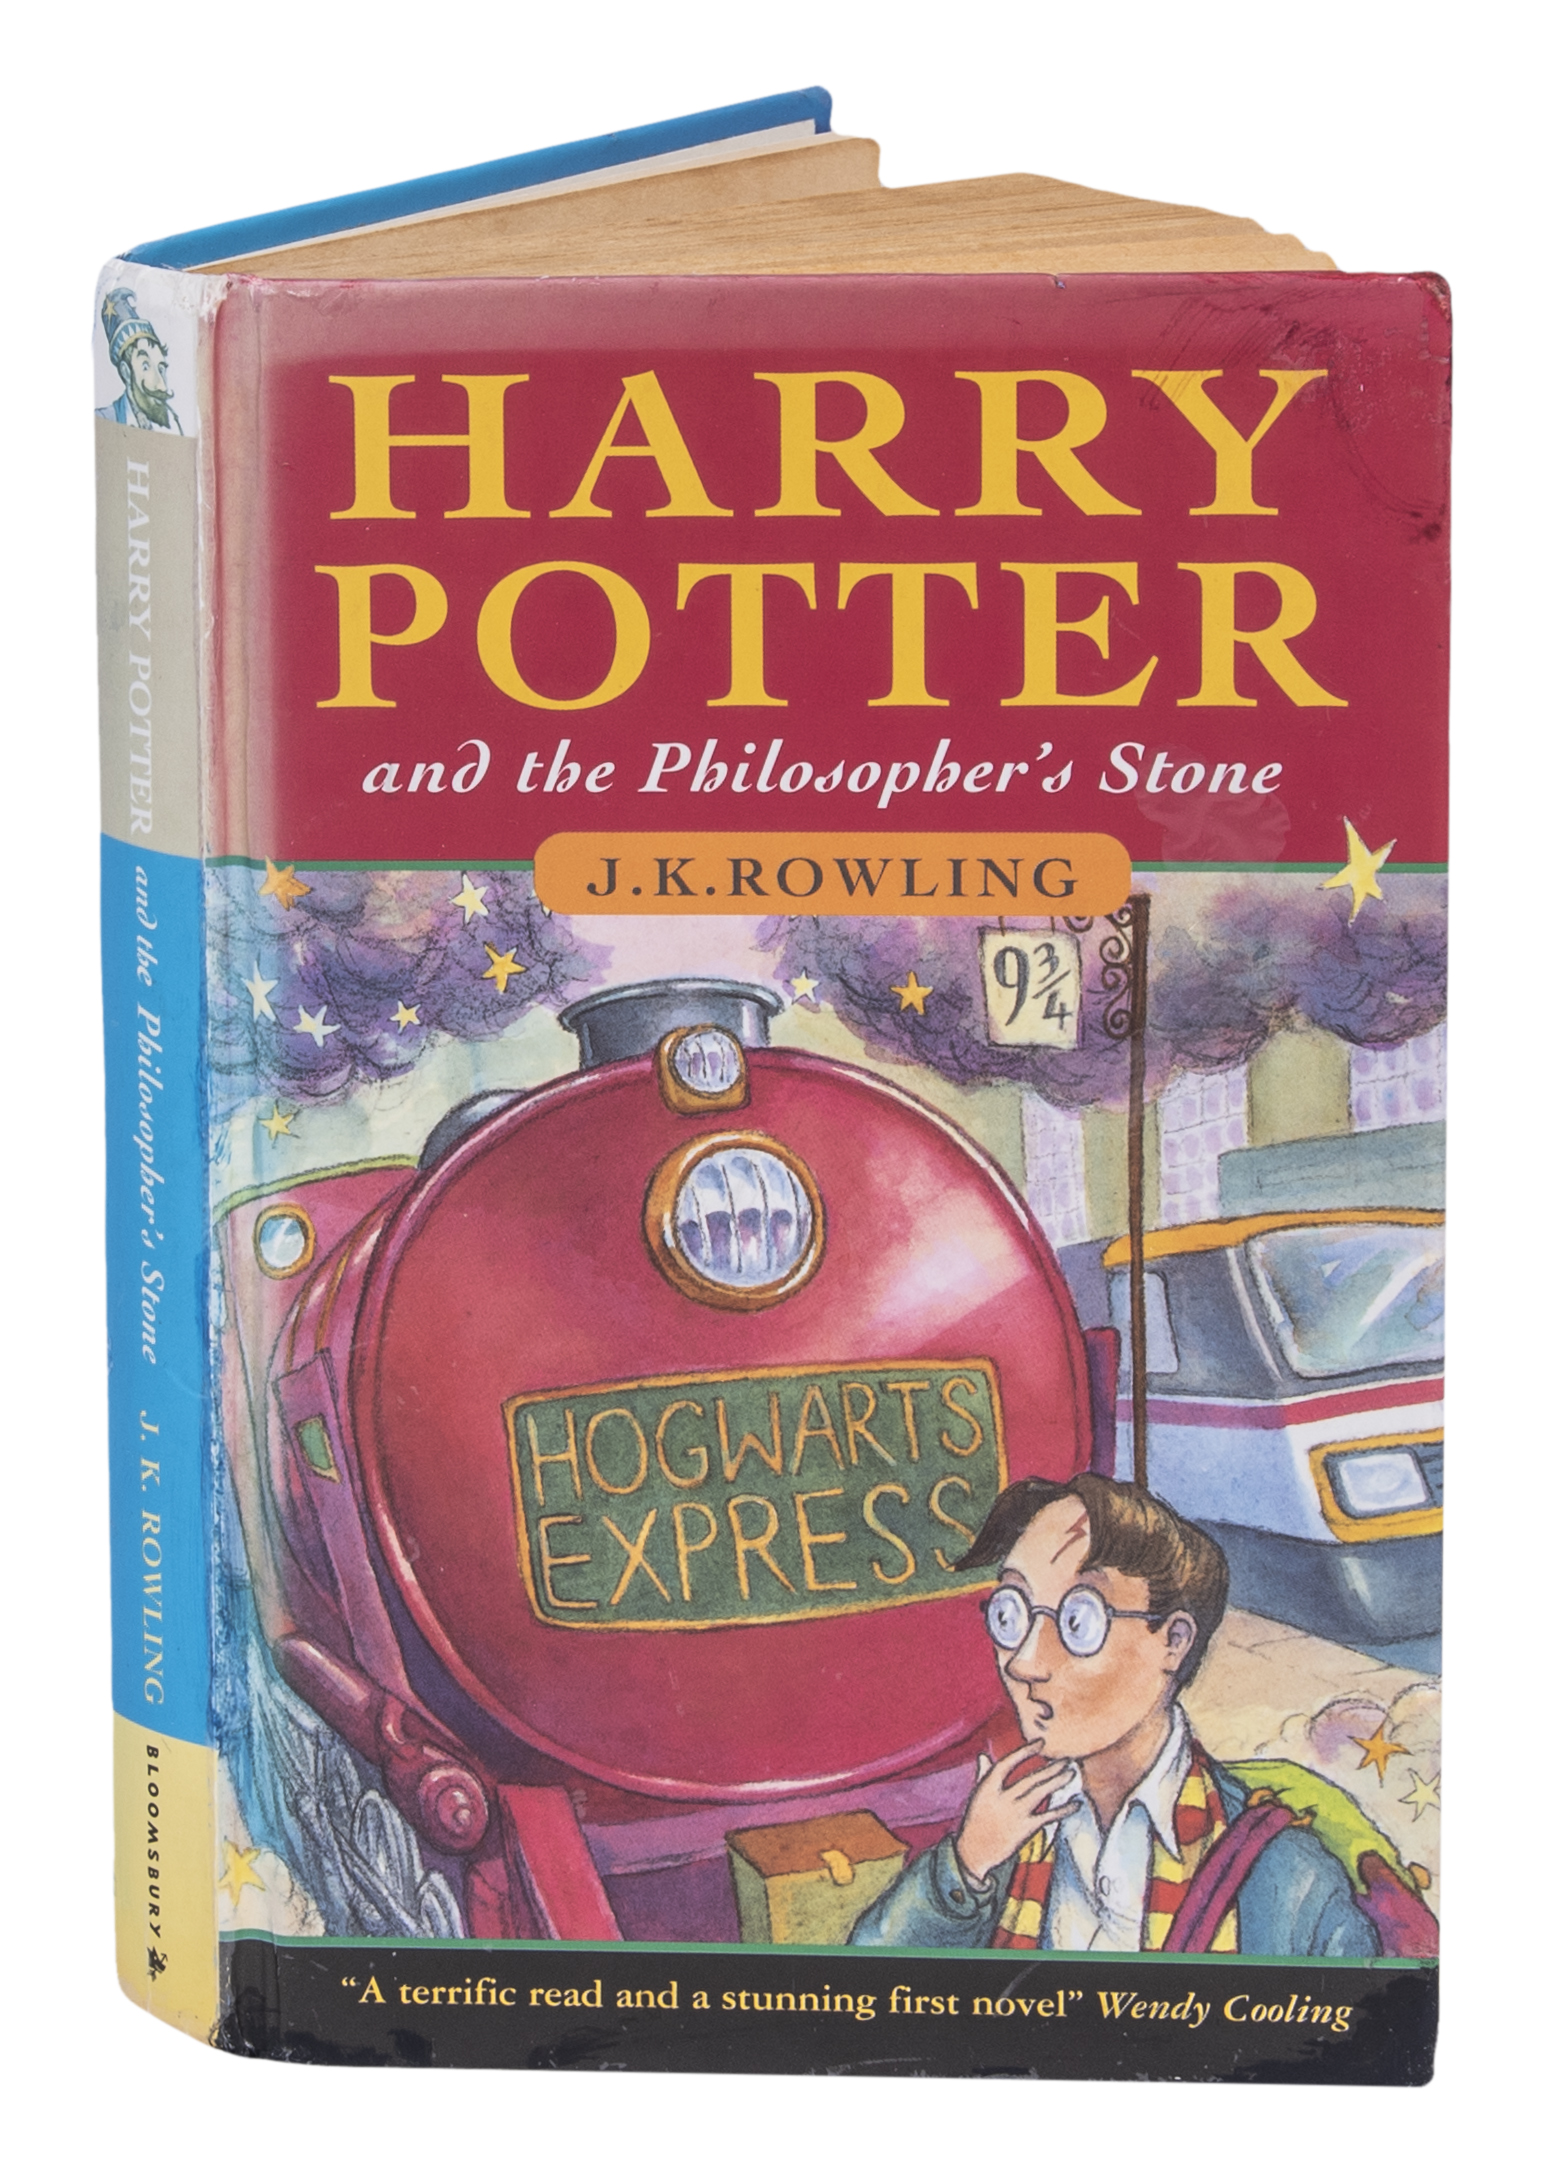 the harry potter book